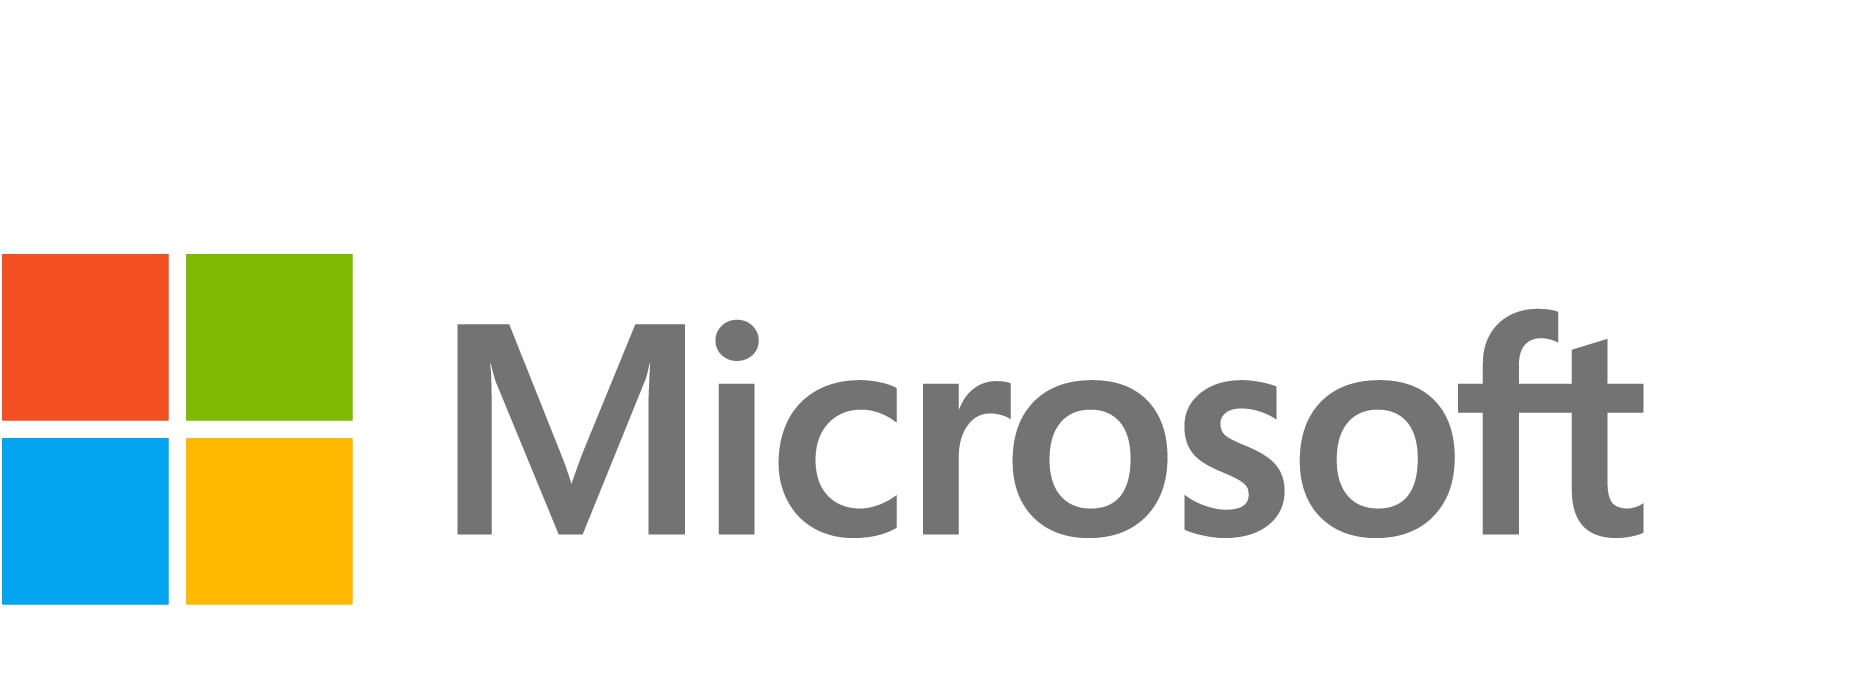 Microsoft Windows Rights Management Services - External Connector Software Assurance - unlimited external users